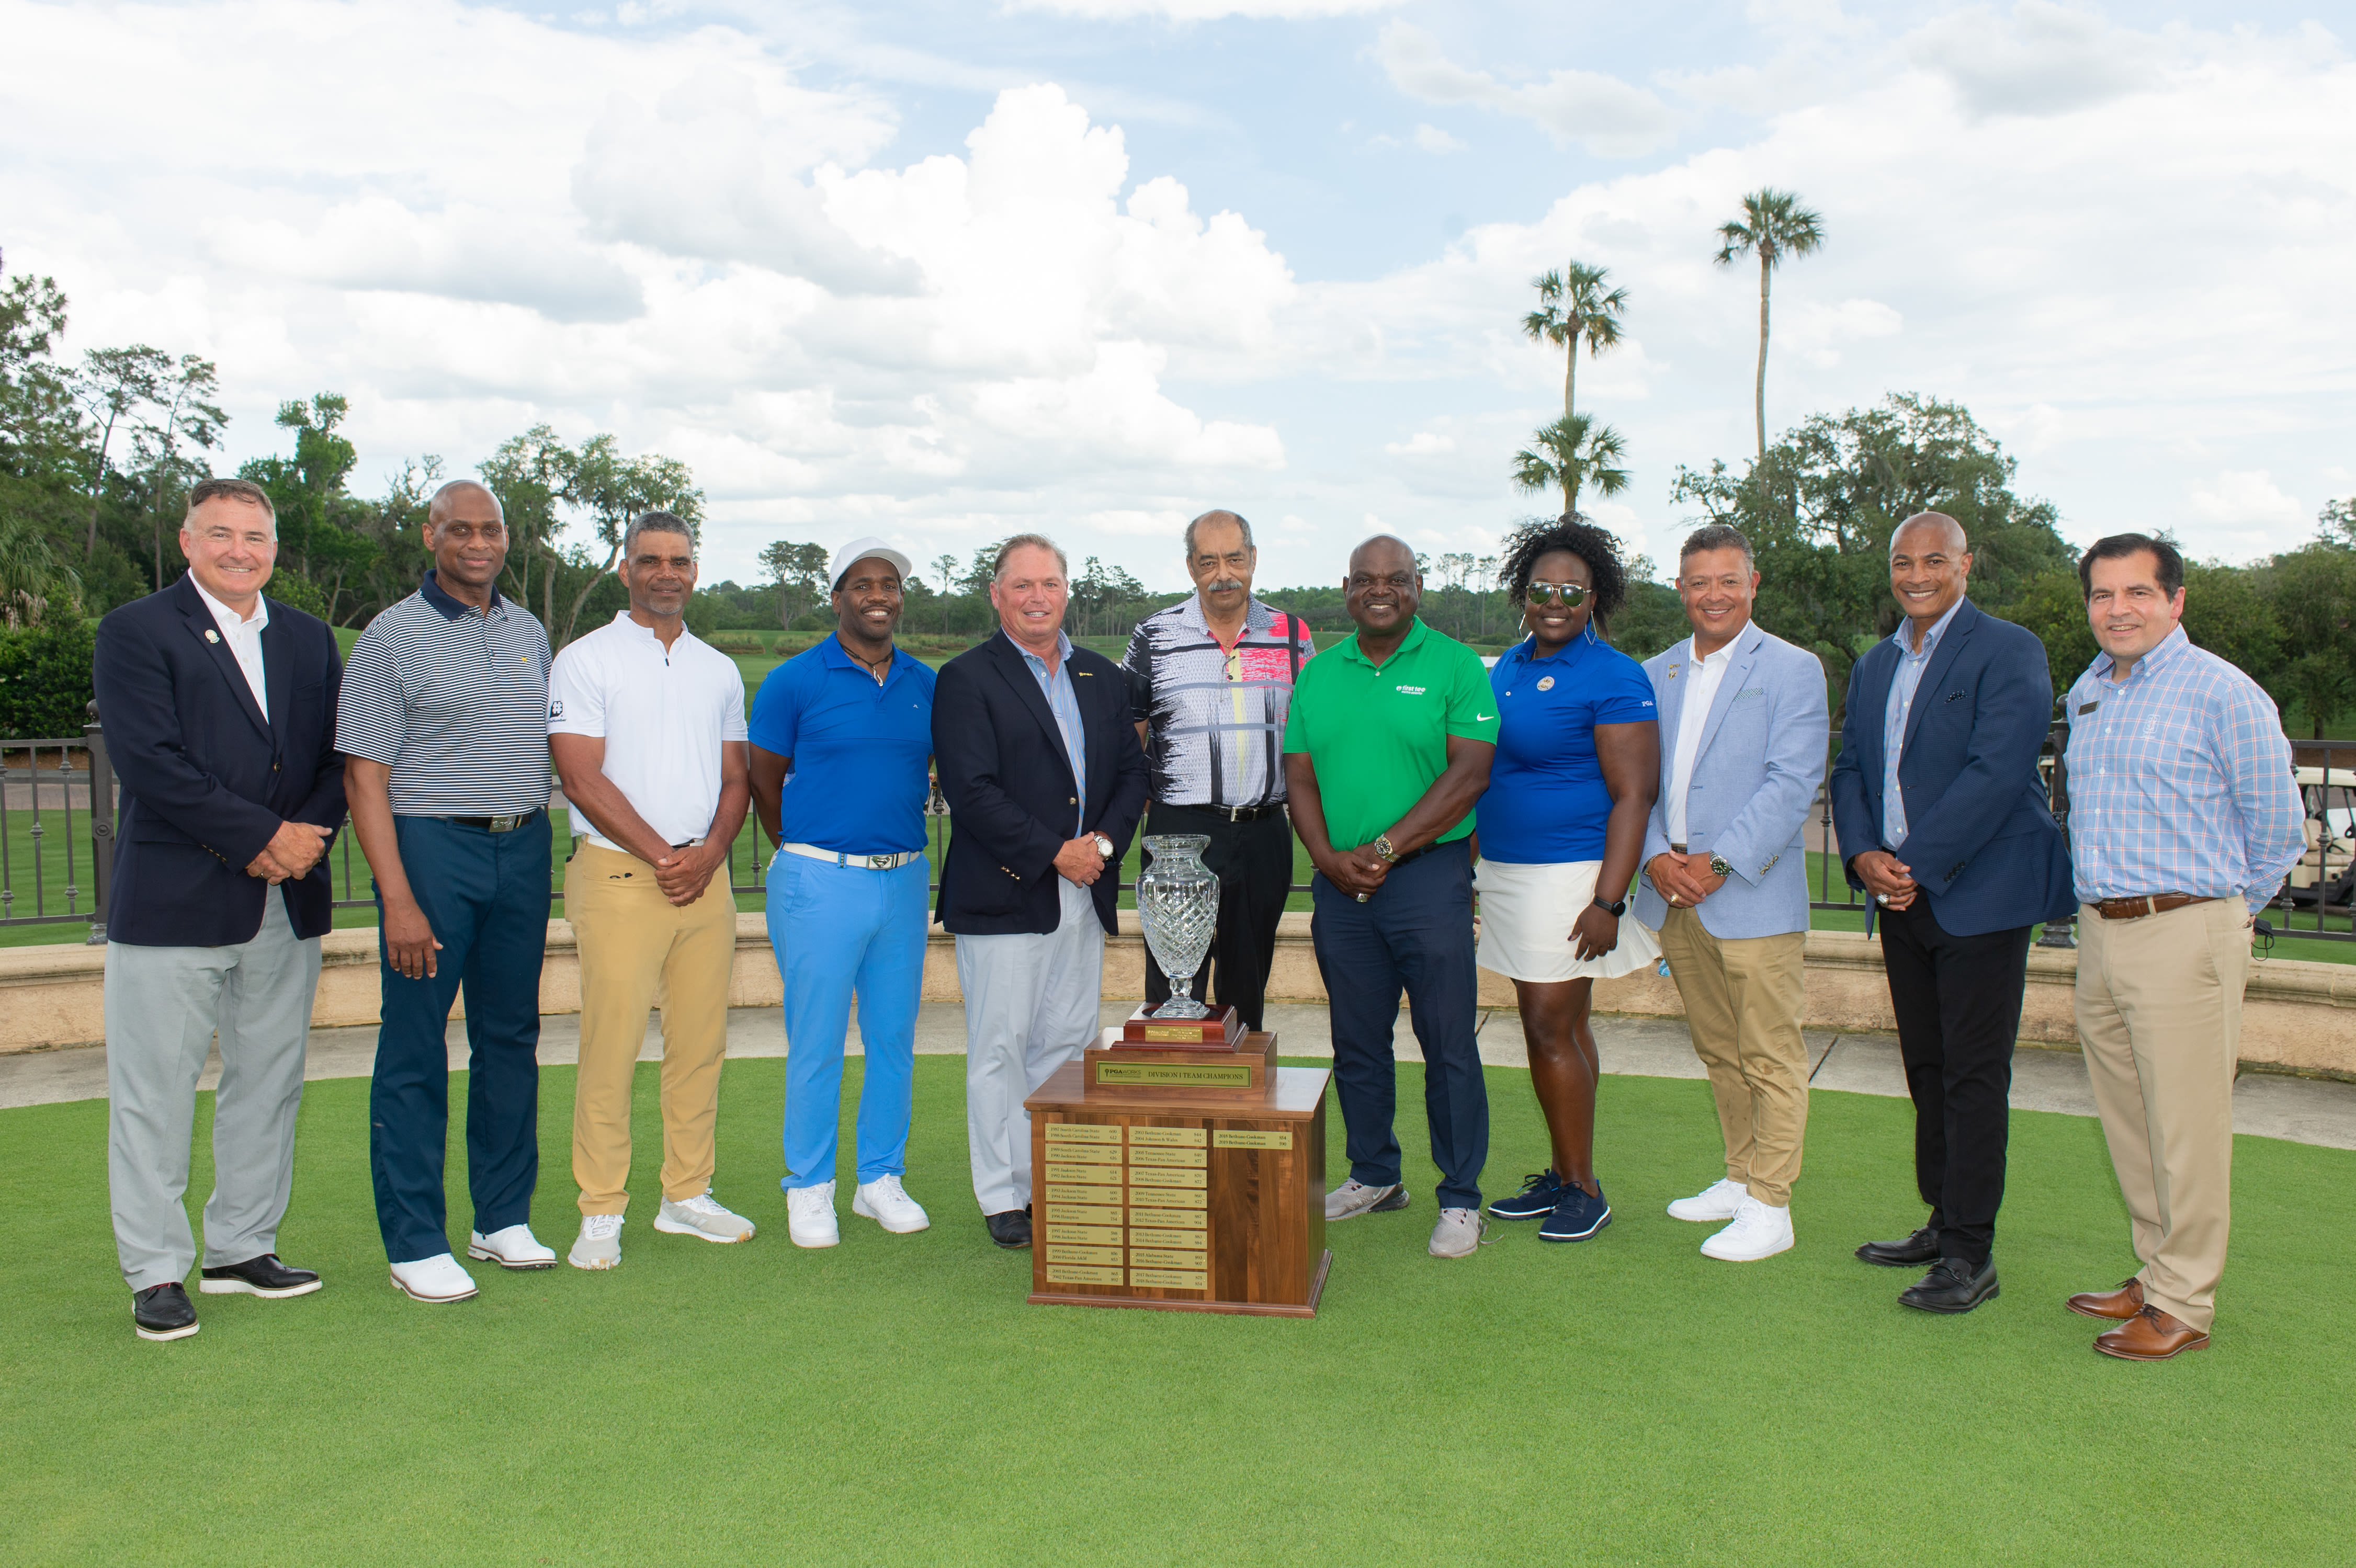 Sprague (far right) and his TPC Sawgrass staff hosted the 2021 PGA WORKS Collegiate Championship, where the final round was contested on the famous Players Stadium Course.